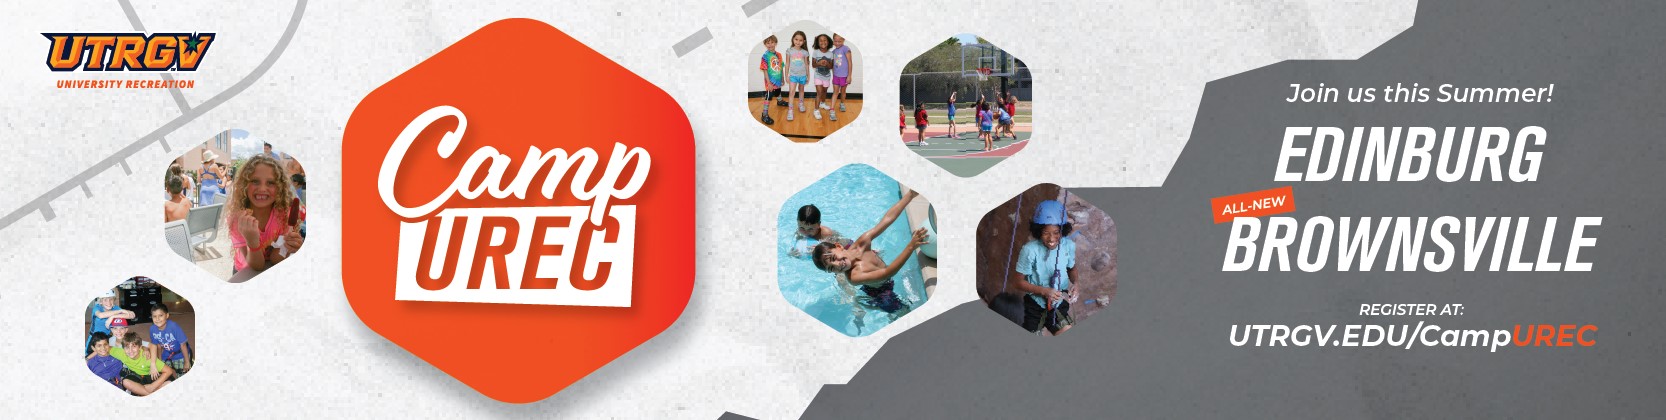 Camp Urec - join us this summer in Edinburg and Brownsville Page Banner 